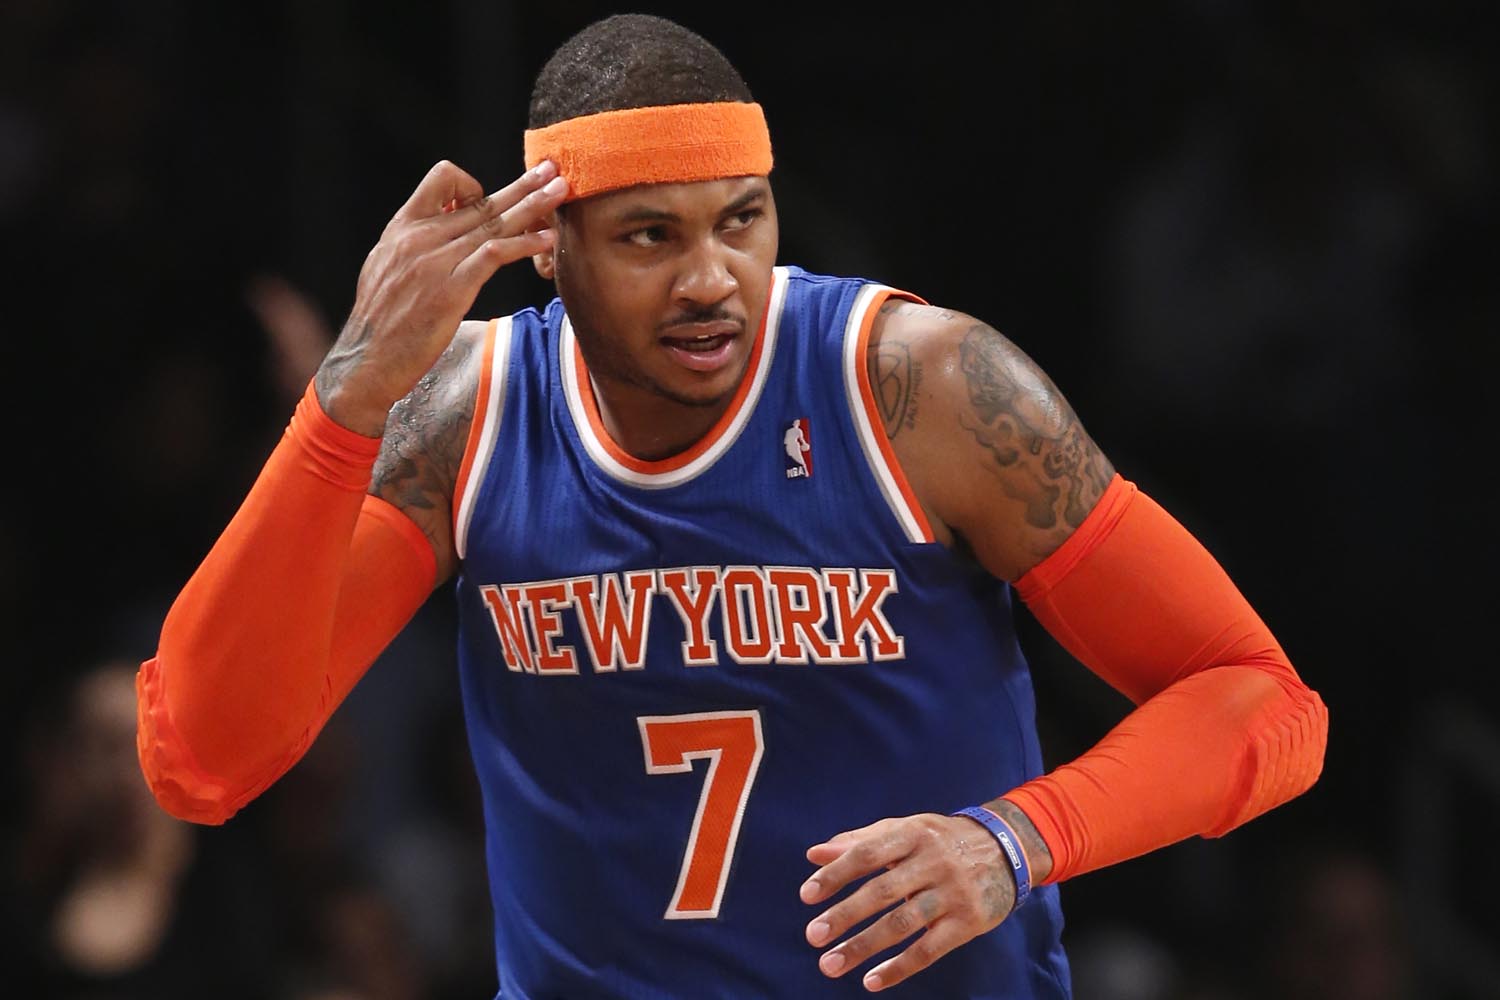 Where can Syracuse legend Carmelo Anthony finish among the NBA's